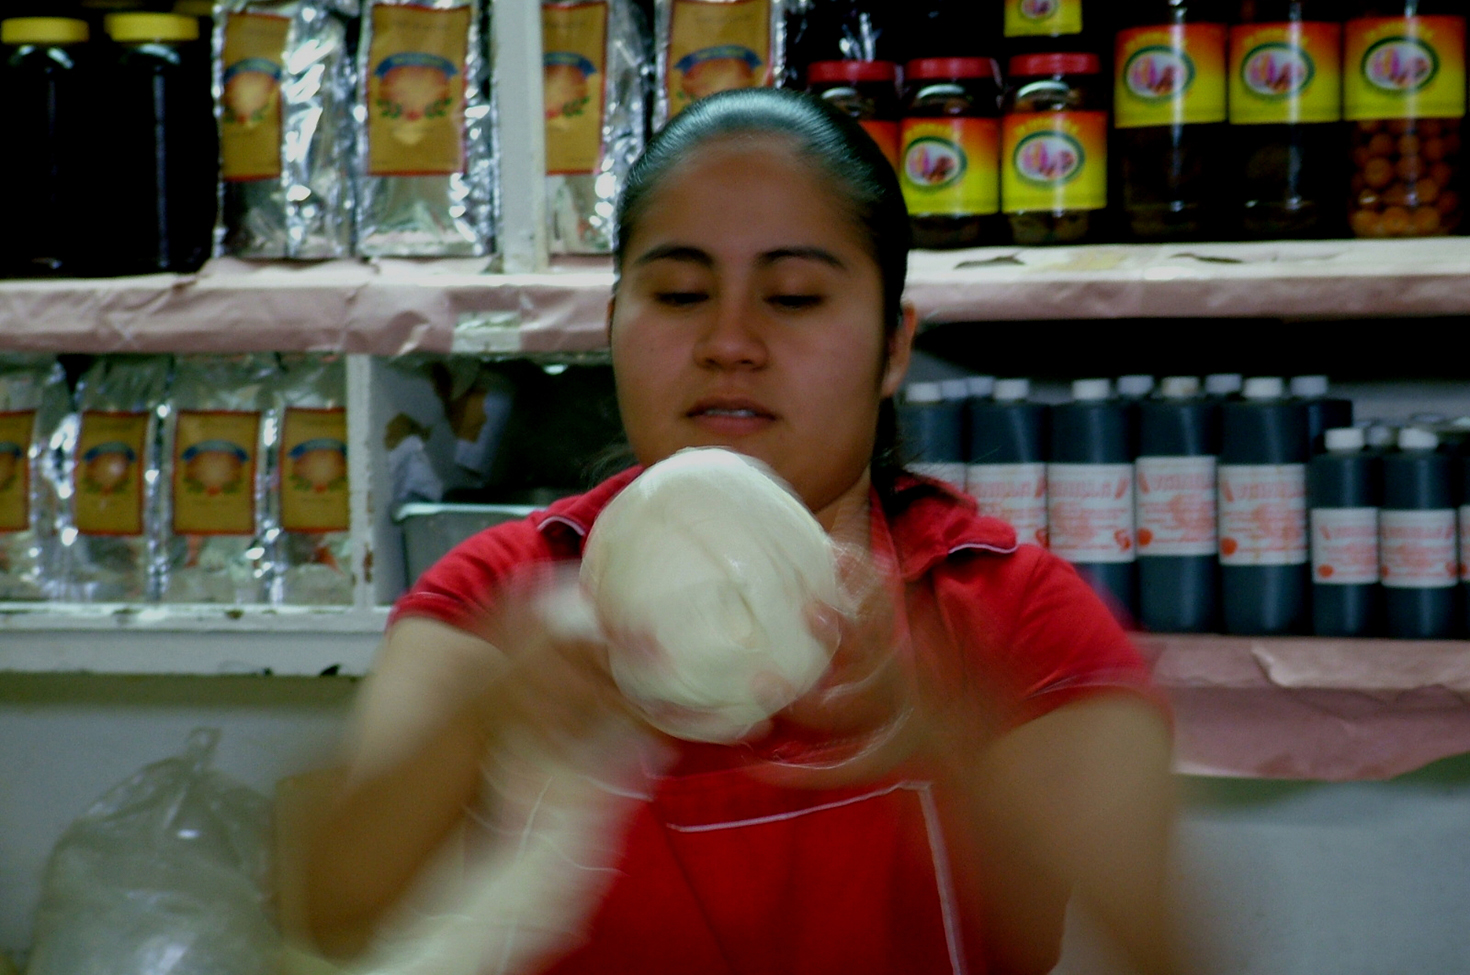 Making Oaxacan cheese, 2003. Photograph by Alexandre Keledjian. Flickr. (CC BY-NC 2.0)